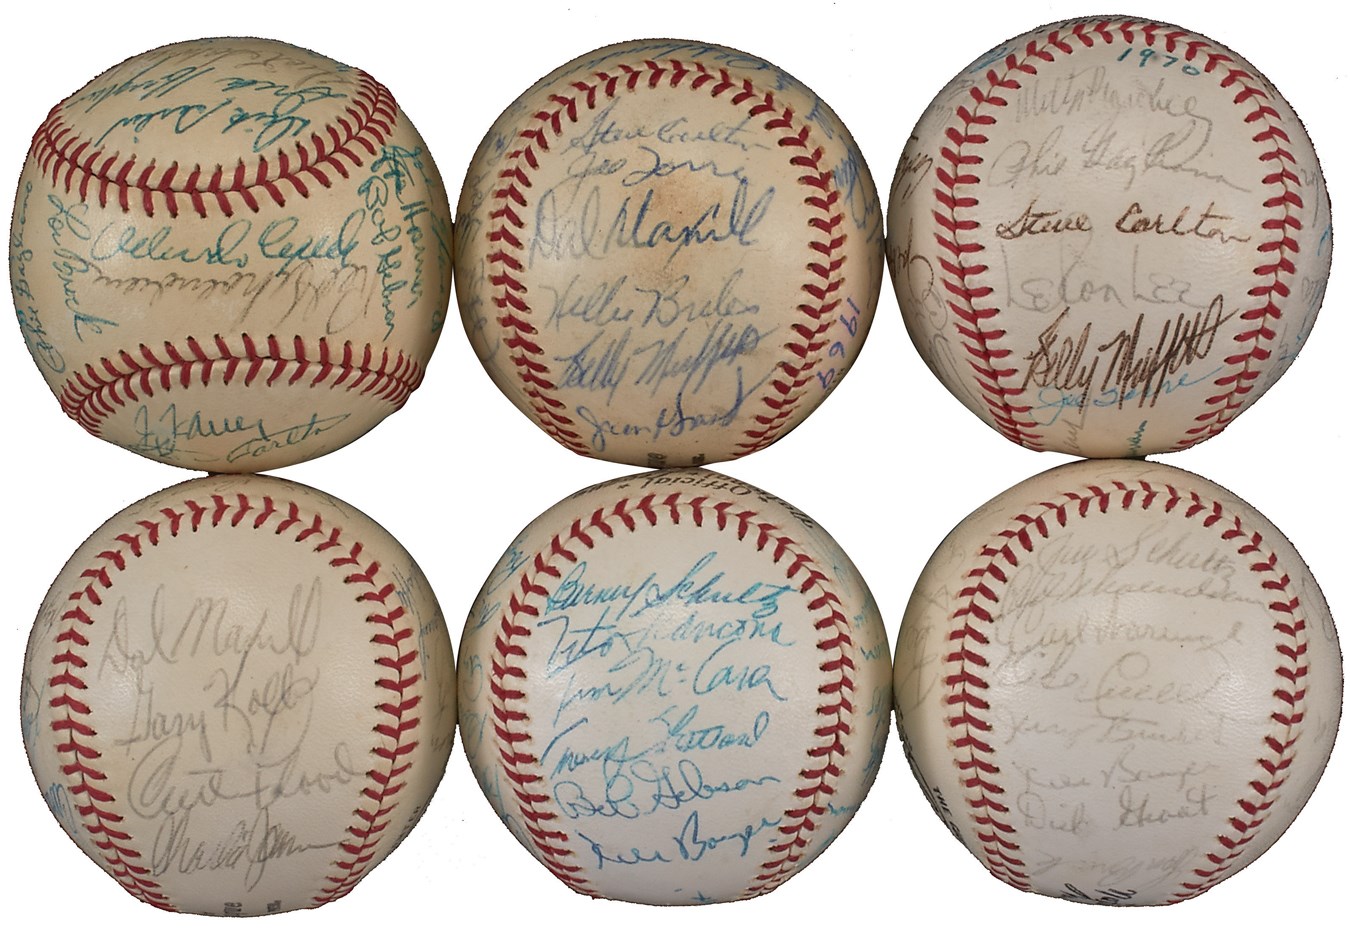 The Mike Shannon St. Louis Cardinals Collection - 1962-1970 St. Louis Cardinals Team-Signed Baseballs (6)